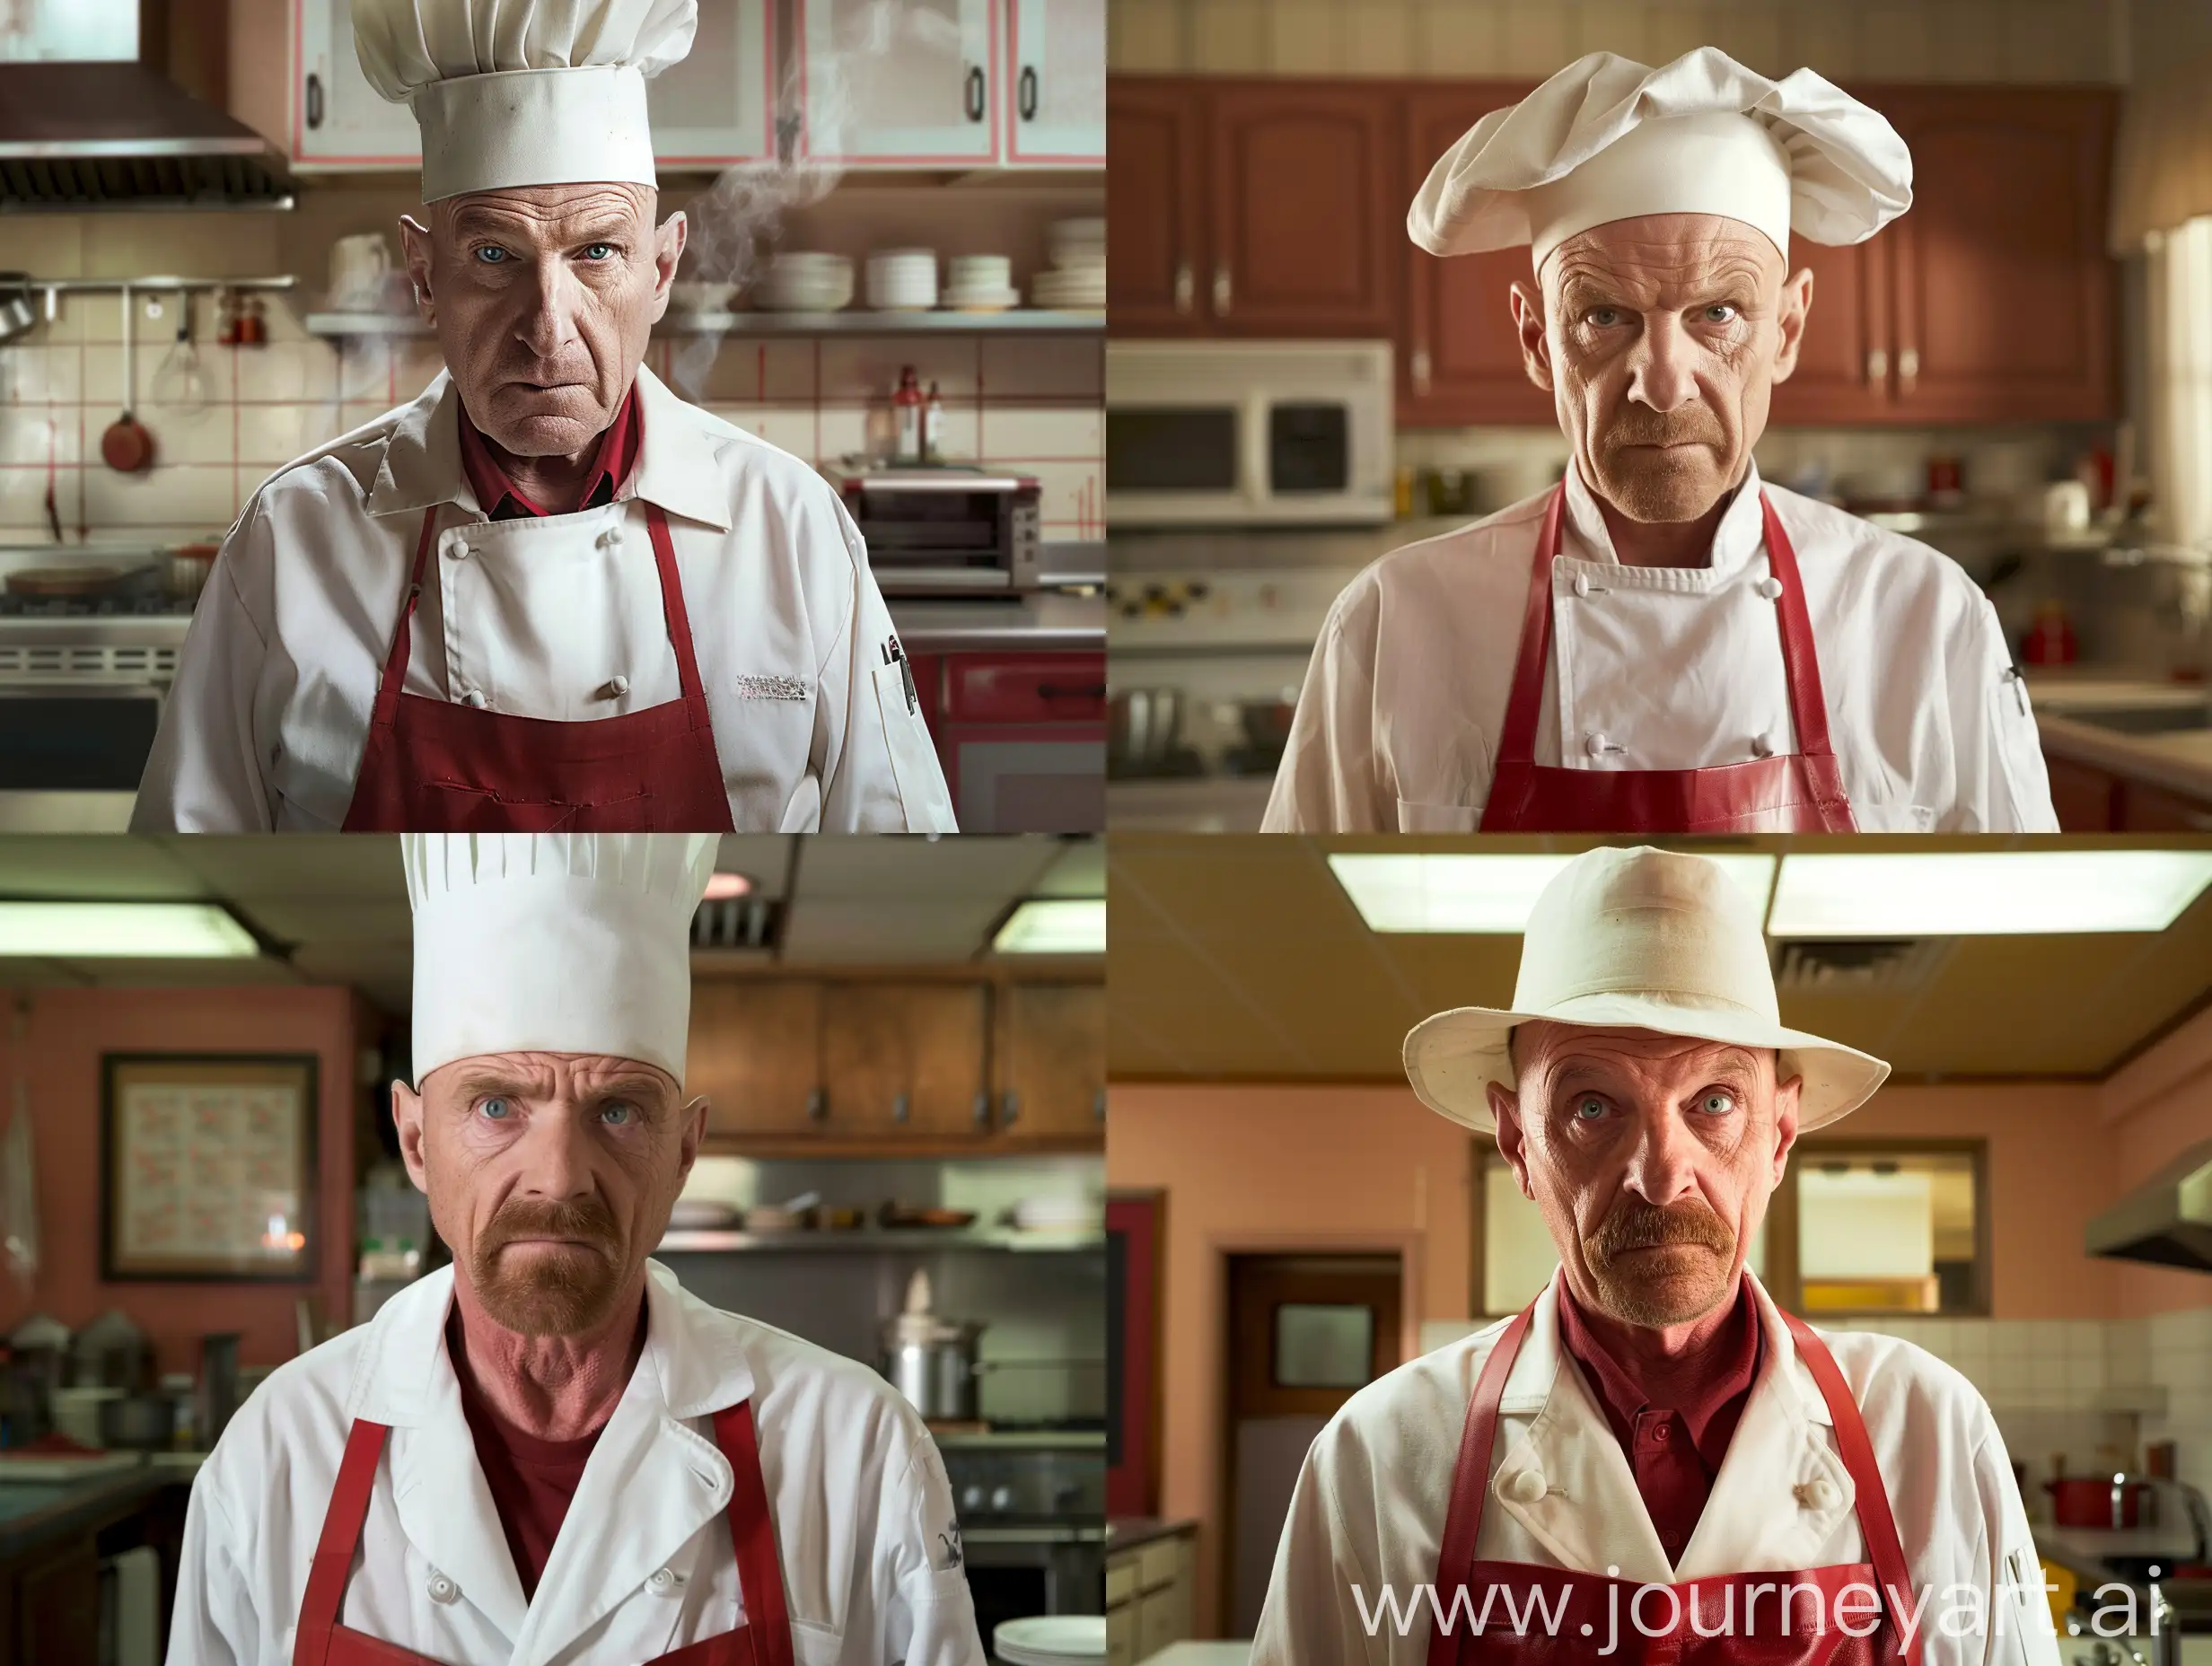 Mike Armantrat (played by Jonathan Banks) is bad in Breaking Bad, Mike Armantrat wearing a white chef's suit, Mike Armantrat wearing a chef's hat, Mike Armantrat (played by Jonathan Banks) wearing a red kitchen apron, Mike Armantrat looking poker face at the camera The background is the kitchen, realistic, q2